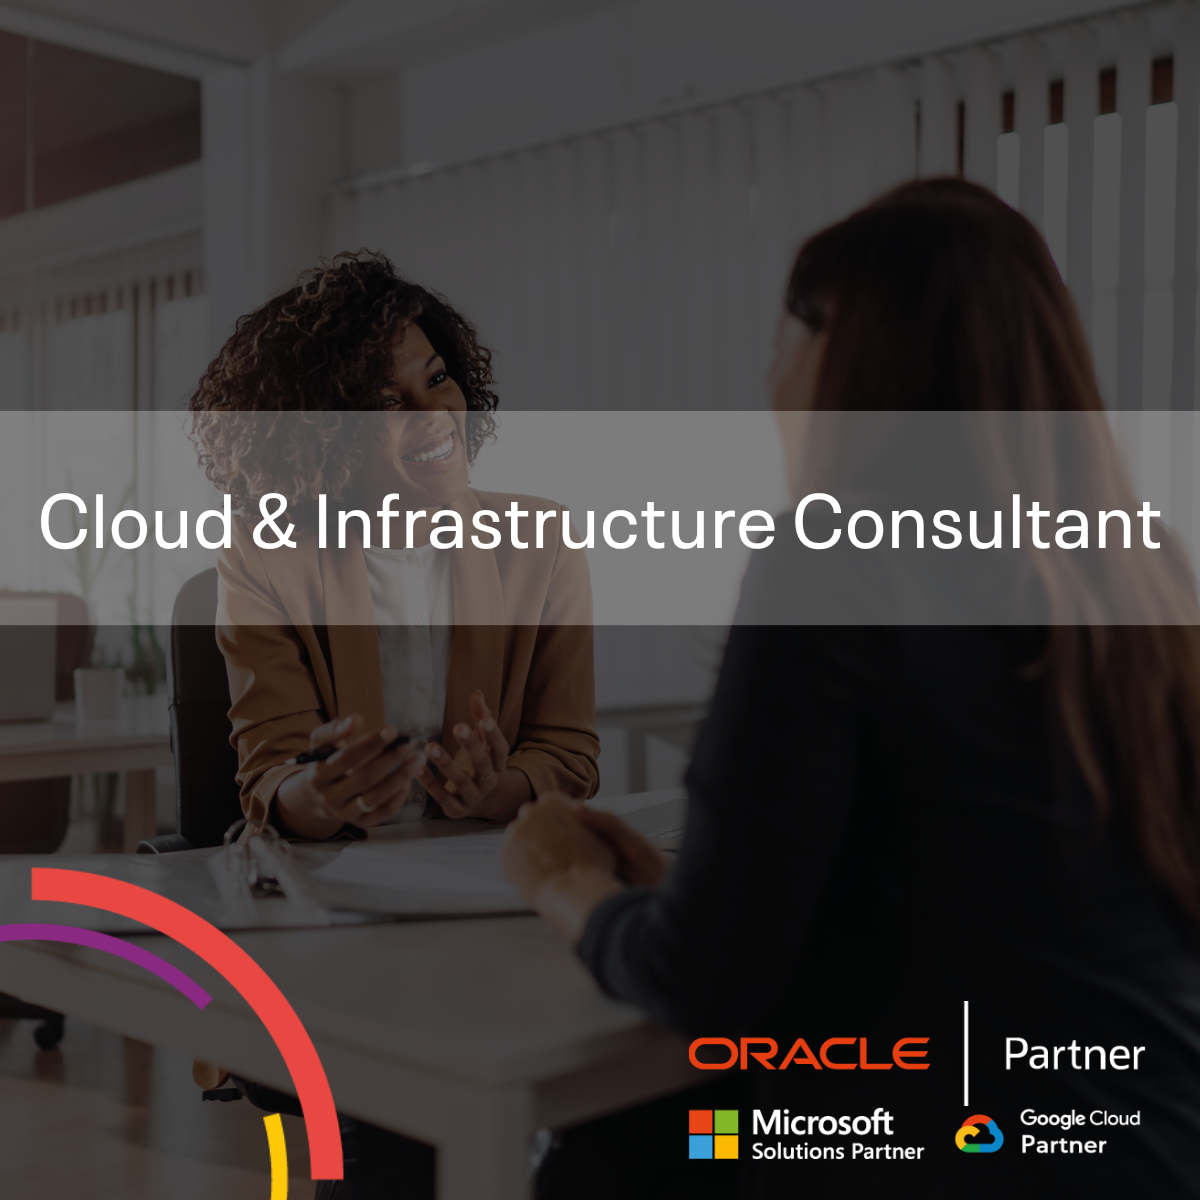 Cloud & Infrastructure Consultant